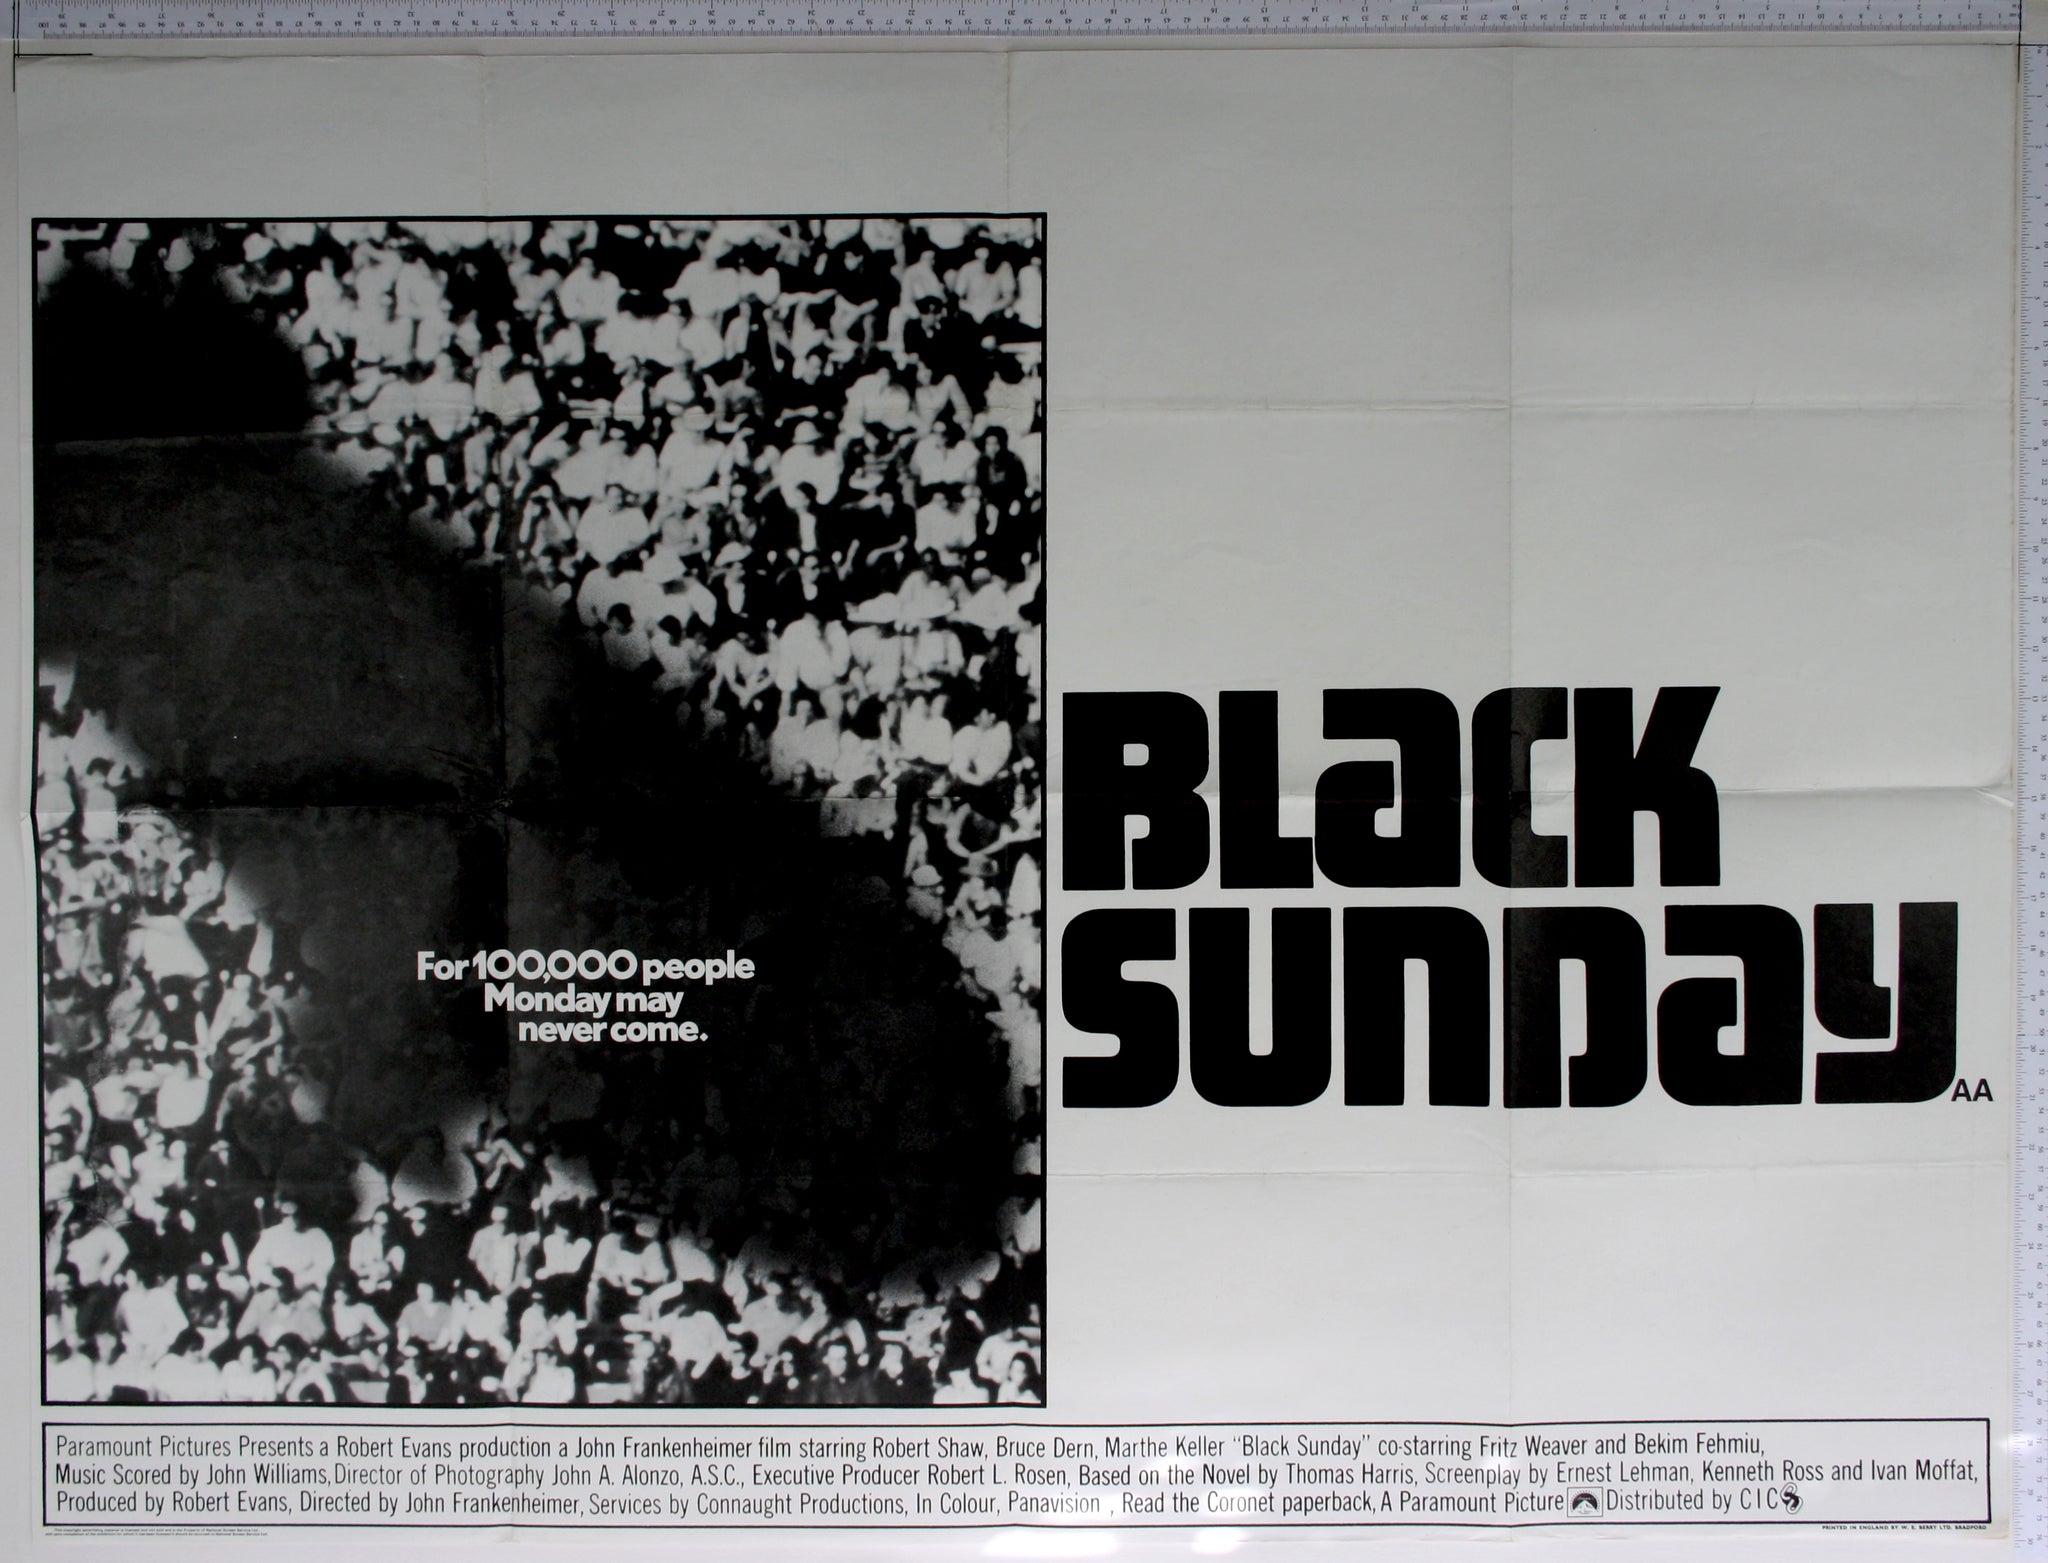 boxed black and white artwork of blimp shadow over sports crowd with large title in black to right, and bottom credit box